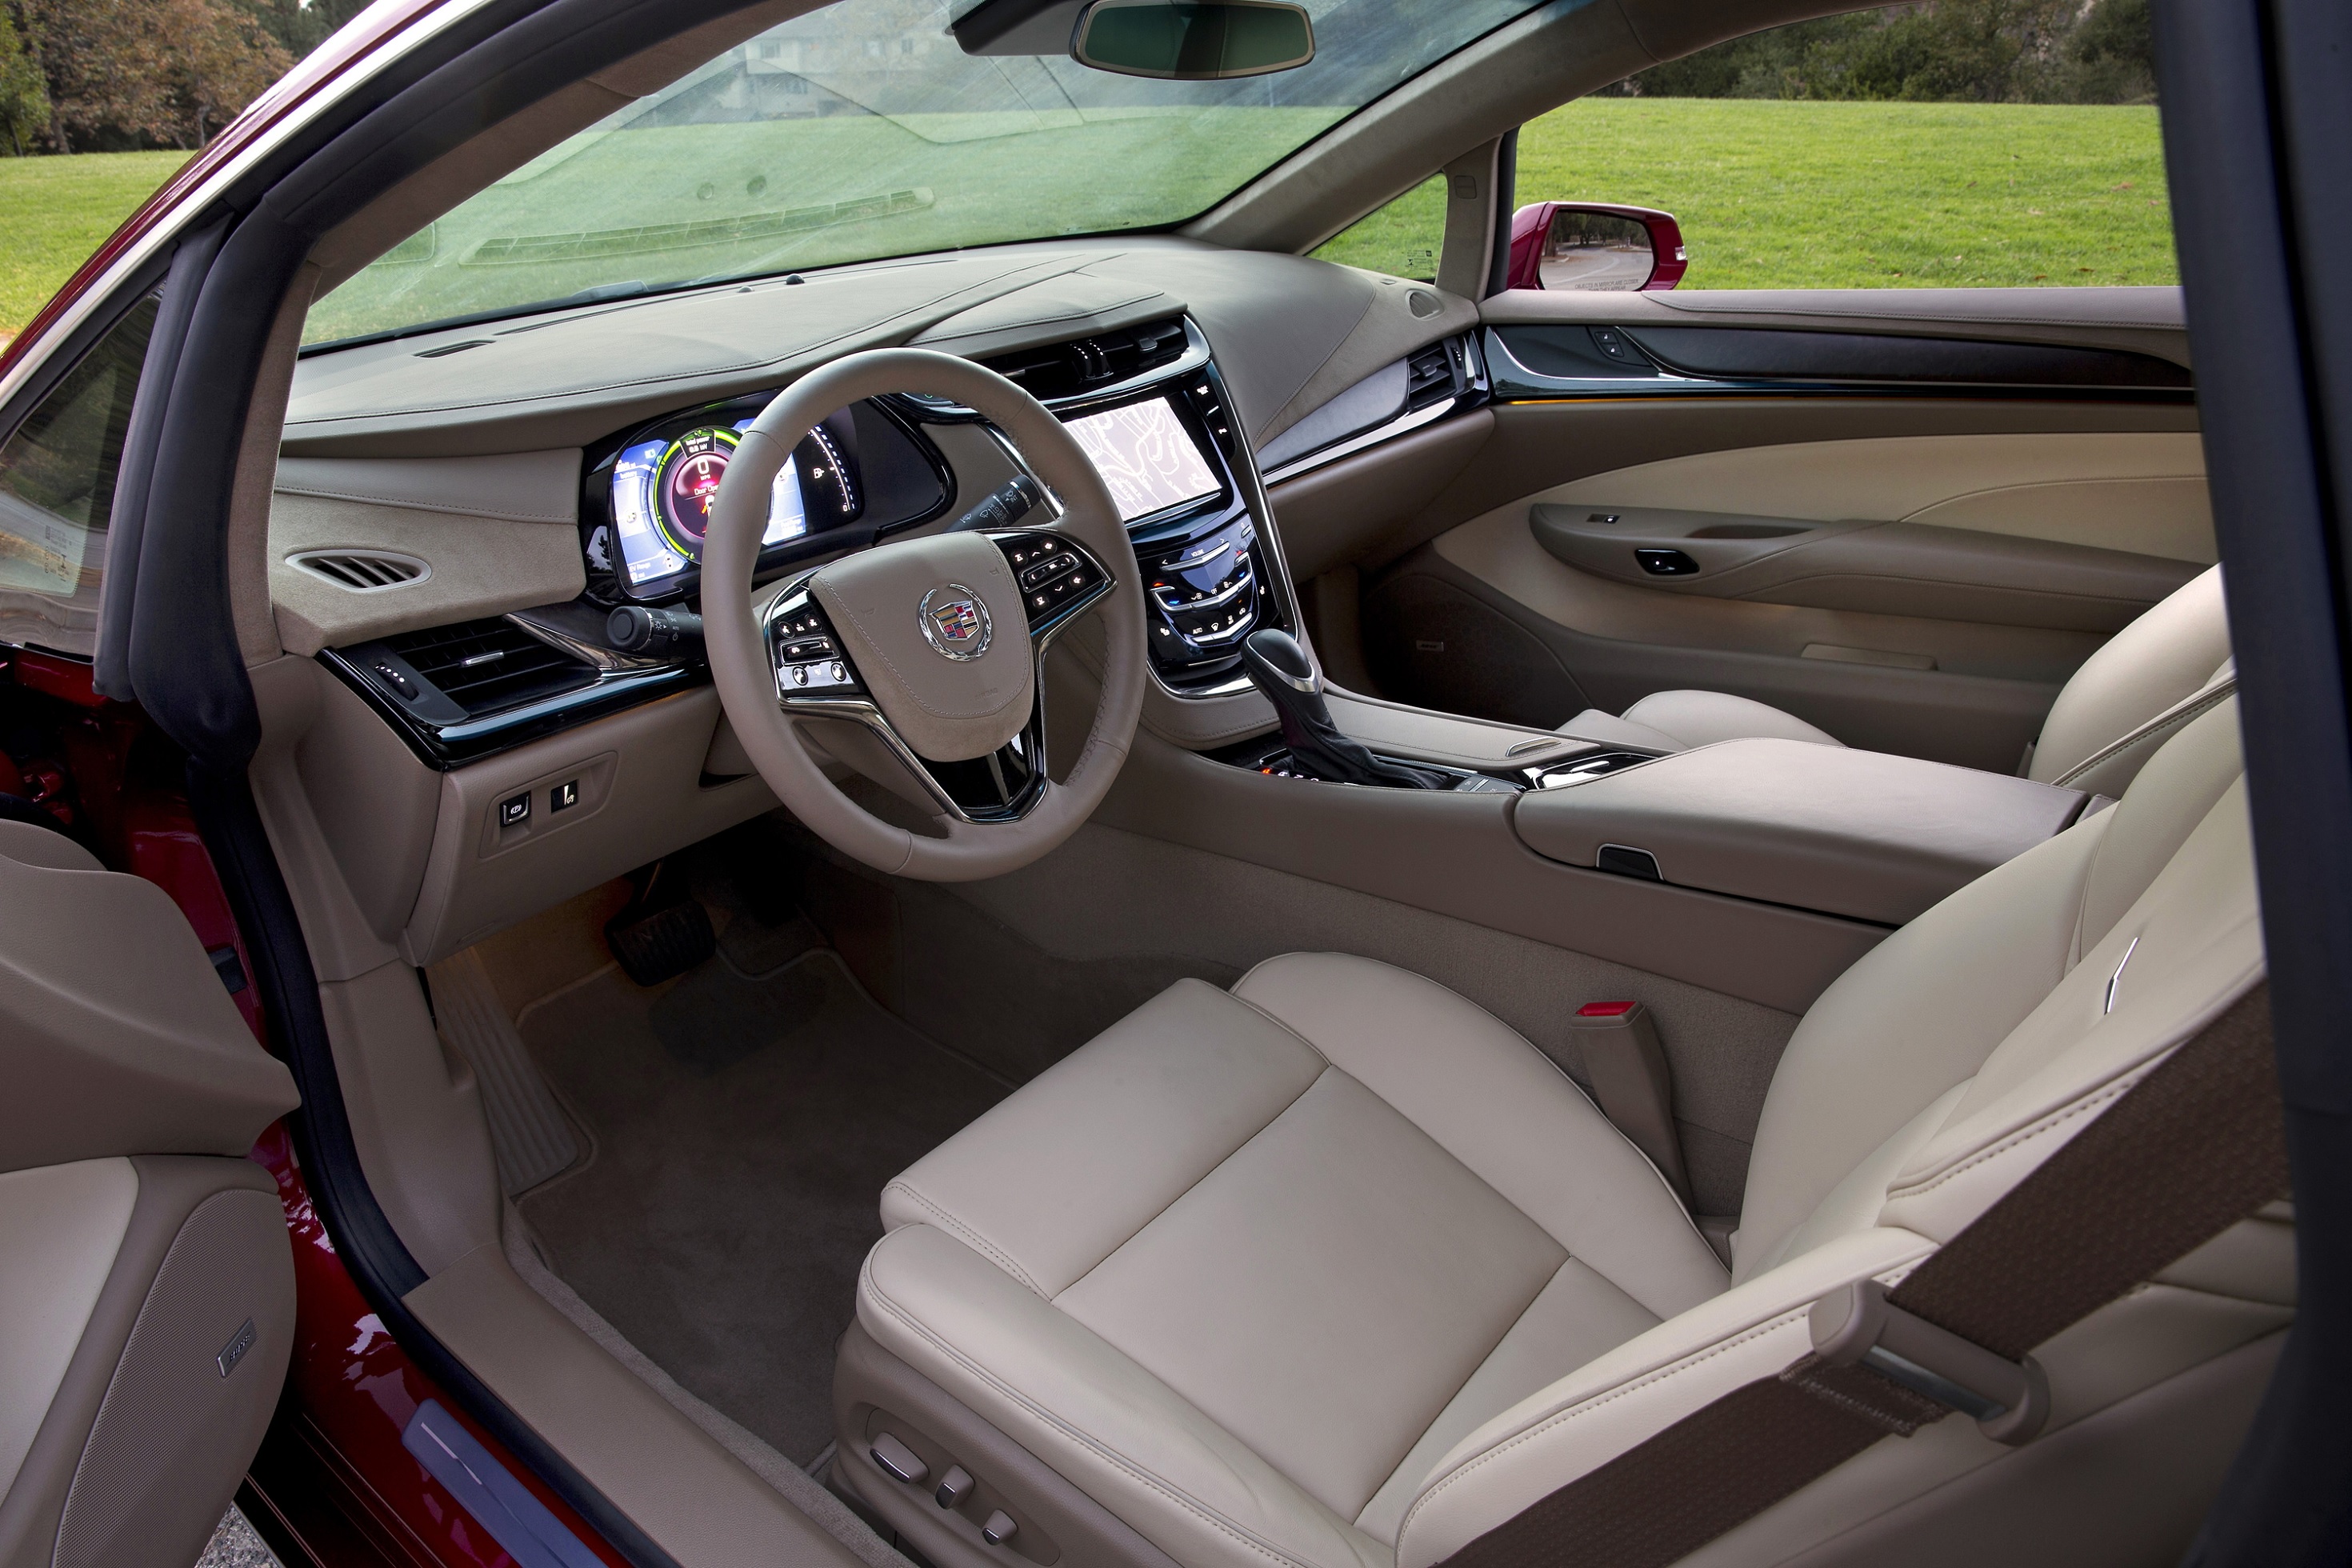 The tan-leather front seats and metal-and-wood dashboard of a 2014 Cadillac ELR